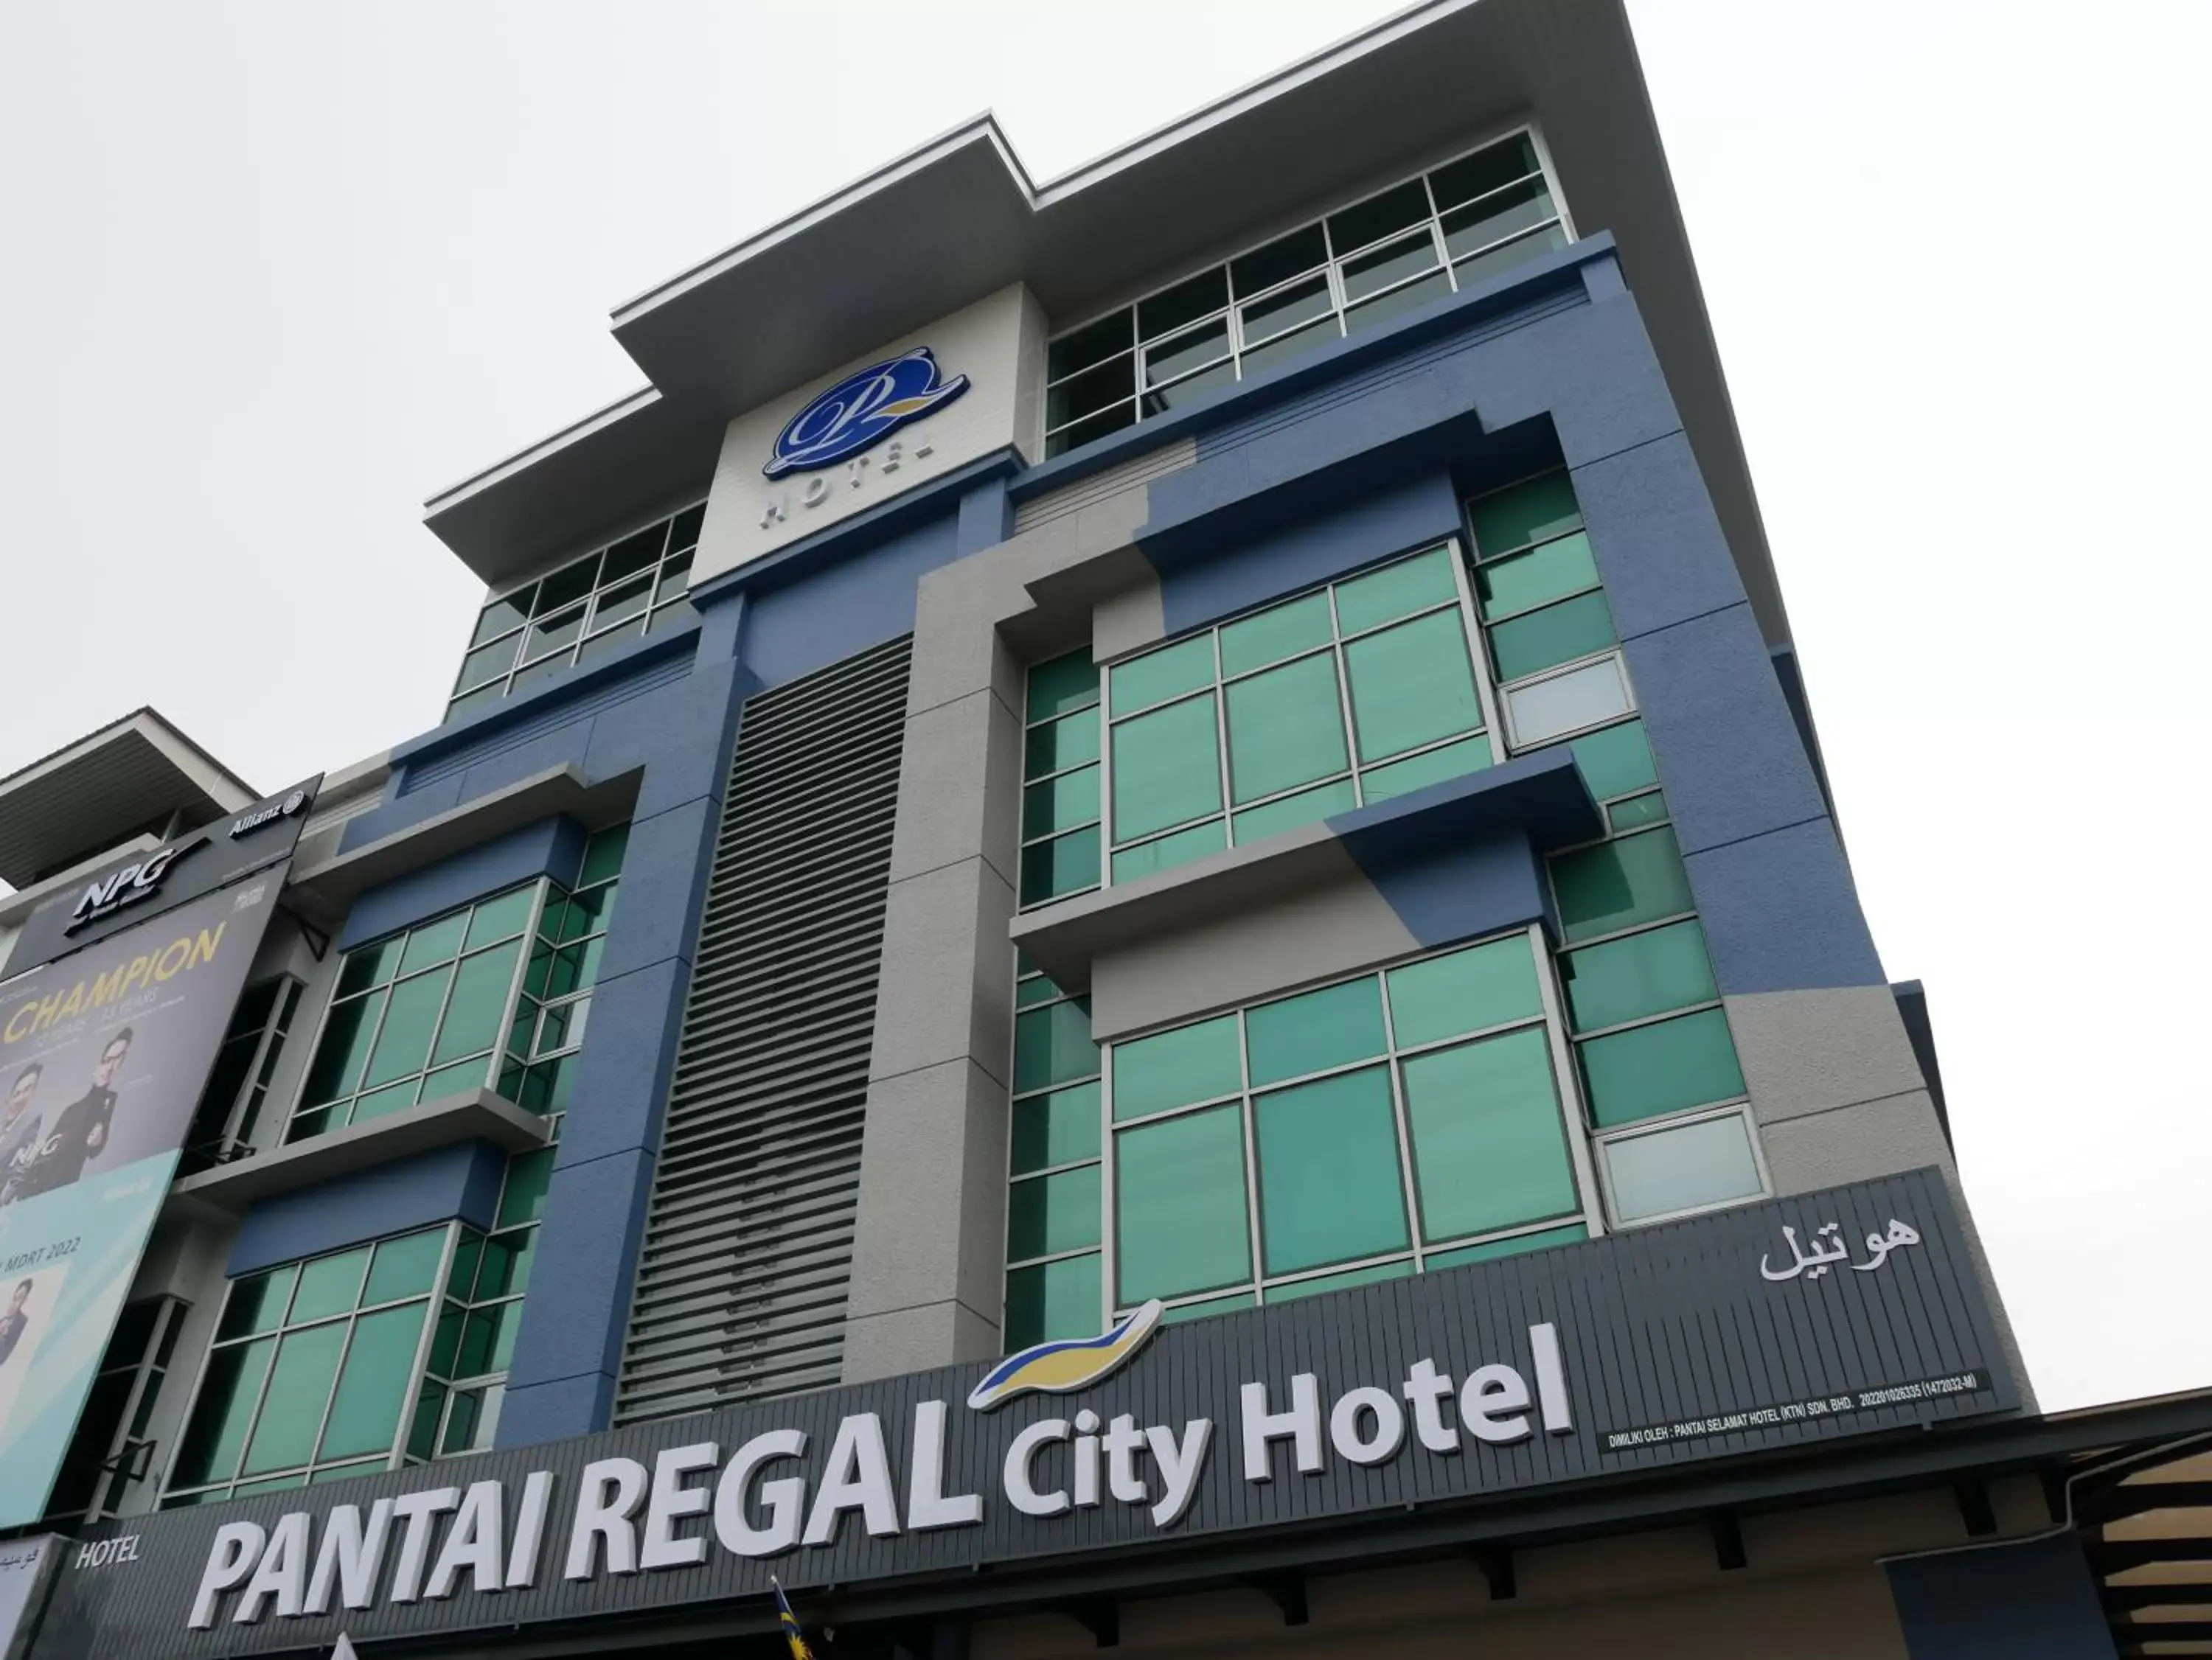 Property logo or sign, Property Building in Pantai Regal City Hotel